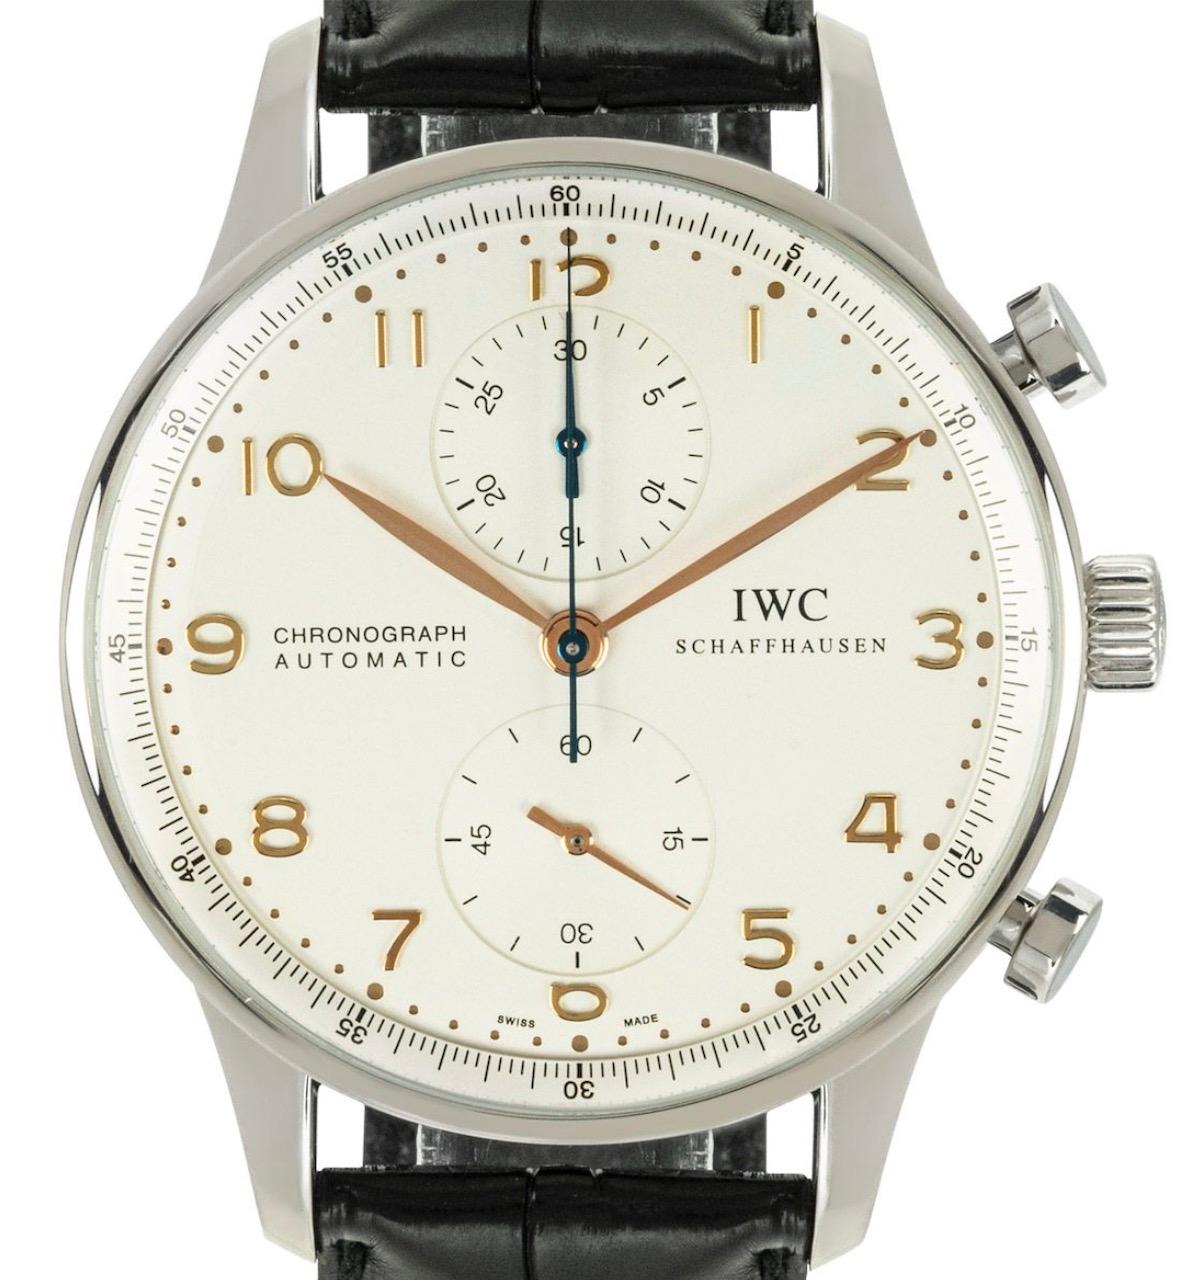 A stainless steel Portuguese Chronograph wristwatch by IWC. Featuring a silver dial, which is protected by a sapphire crystal. The watch further features two chronograph counters and minutes around the outer edge which is indicated by the blued